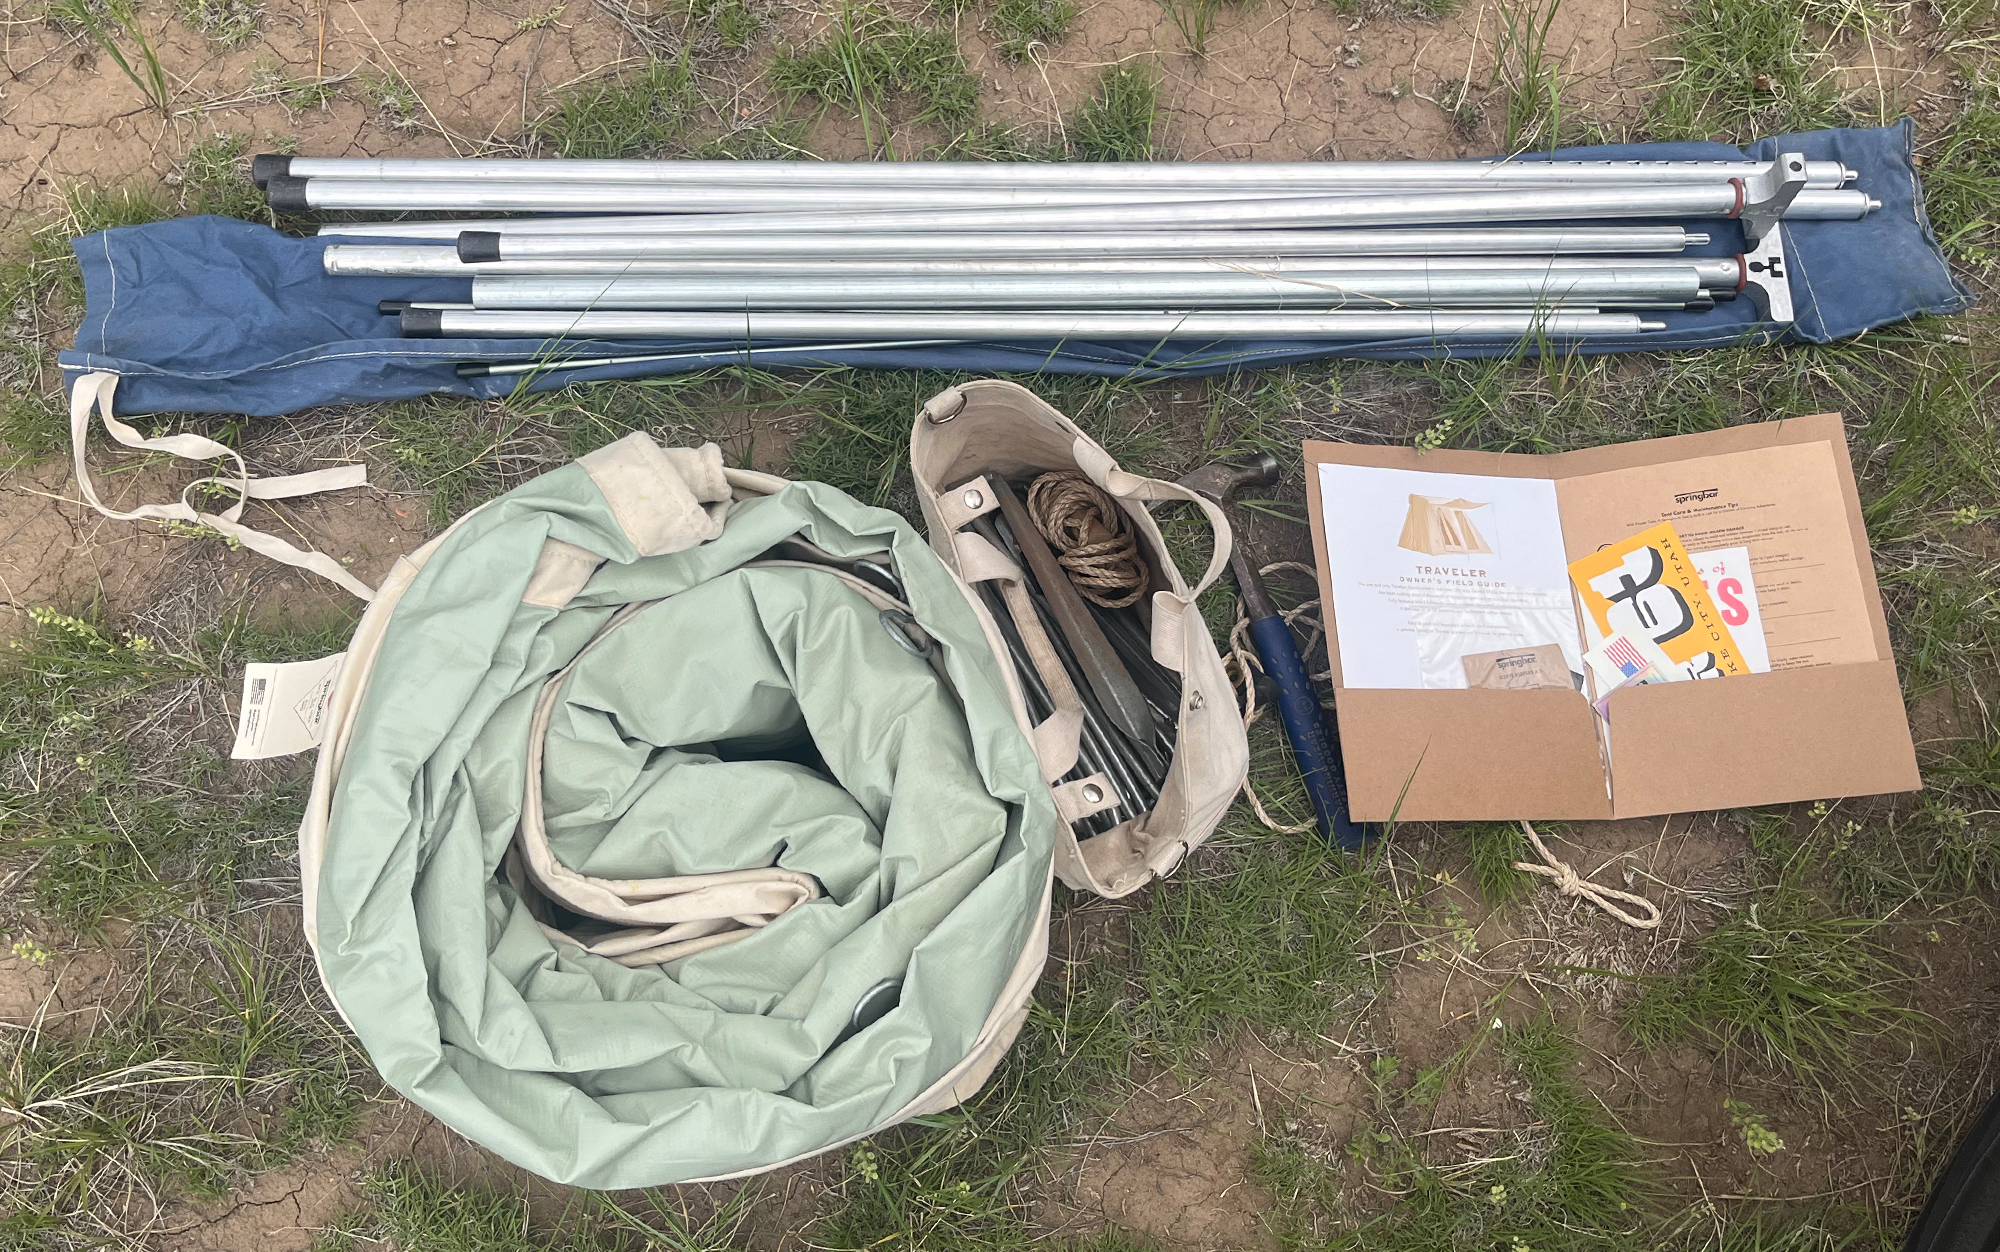 Pictured is the Traveler tent with storage bag, pole set with storage bag, tent stakes in the included canvas bag with awning ropes, the ownerâs field guide, and a hammer.